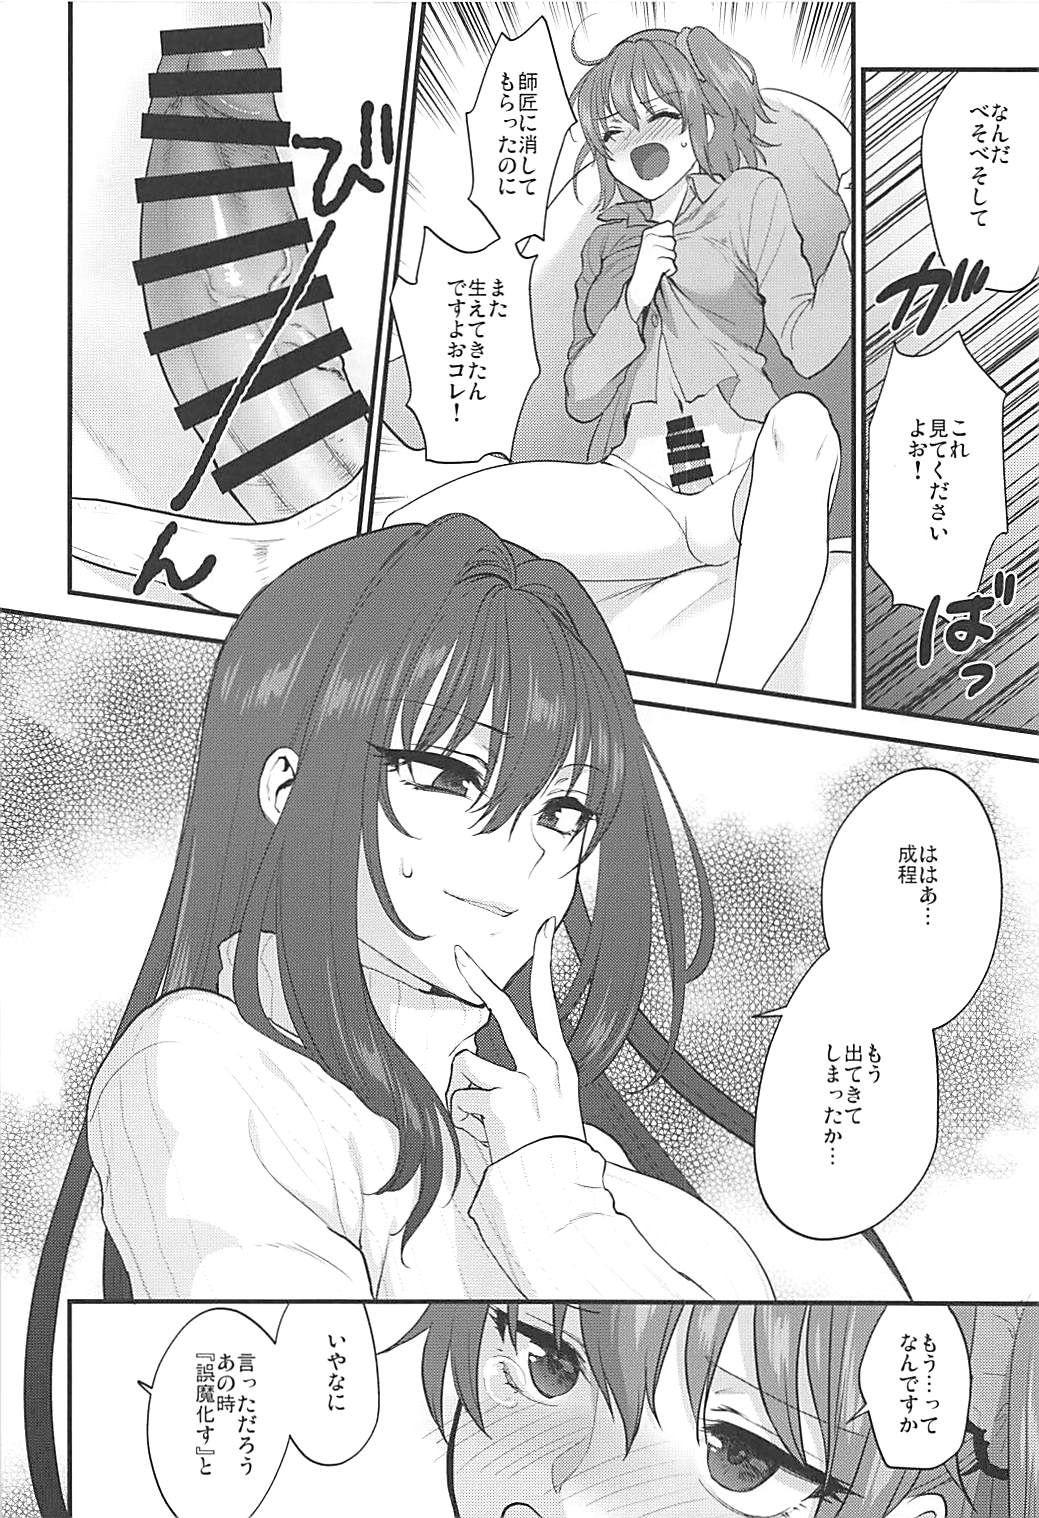 Groupsex In my room. - Fate grand order Gay Ass Fucking - Page 5